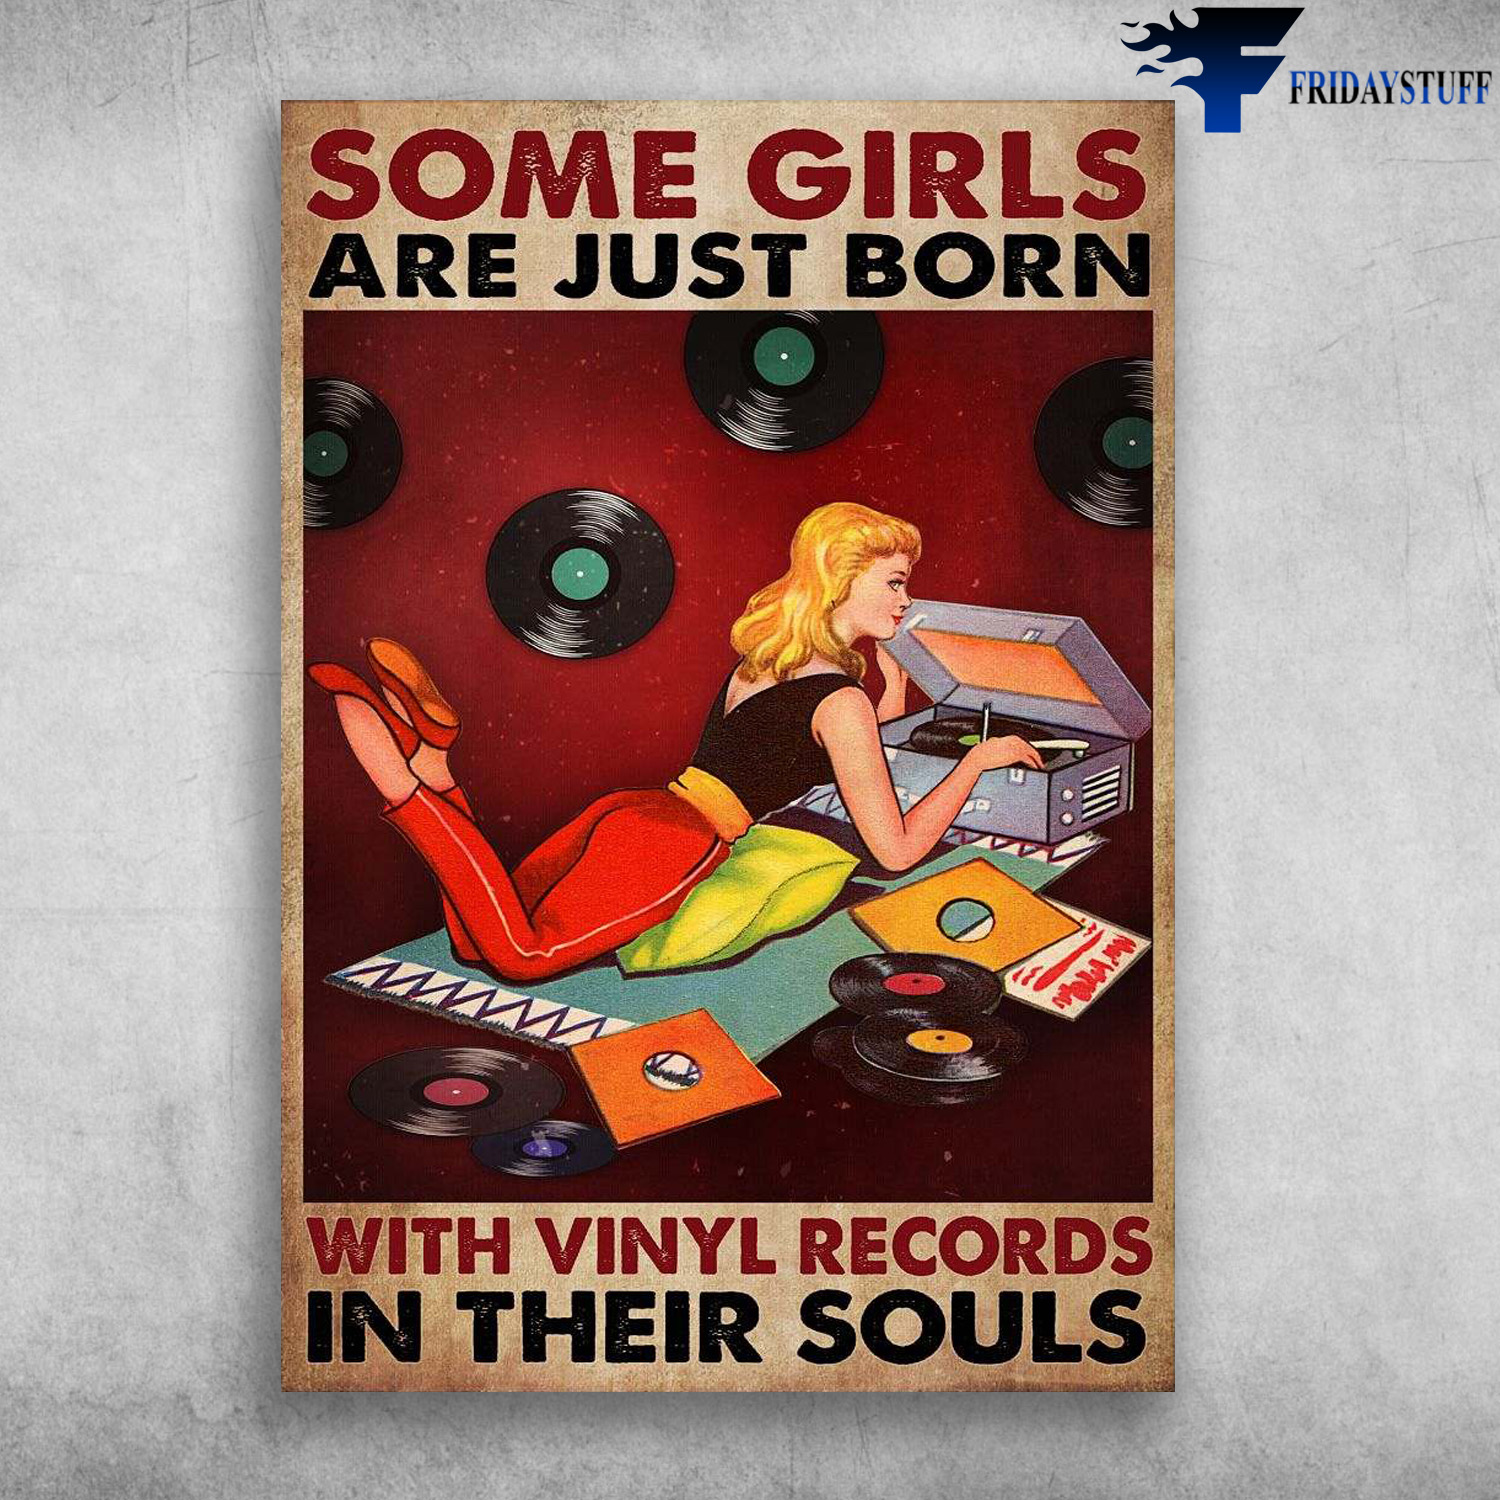 Girl Loves Vinyl, Vinyl Records - Some Girls Are Just Born, With Vinyl Records, In Their Souls